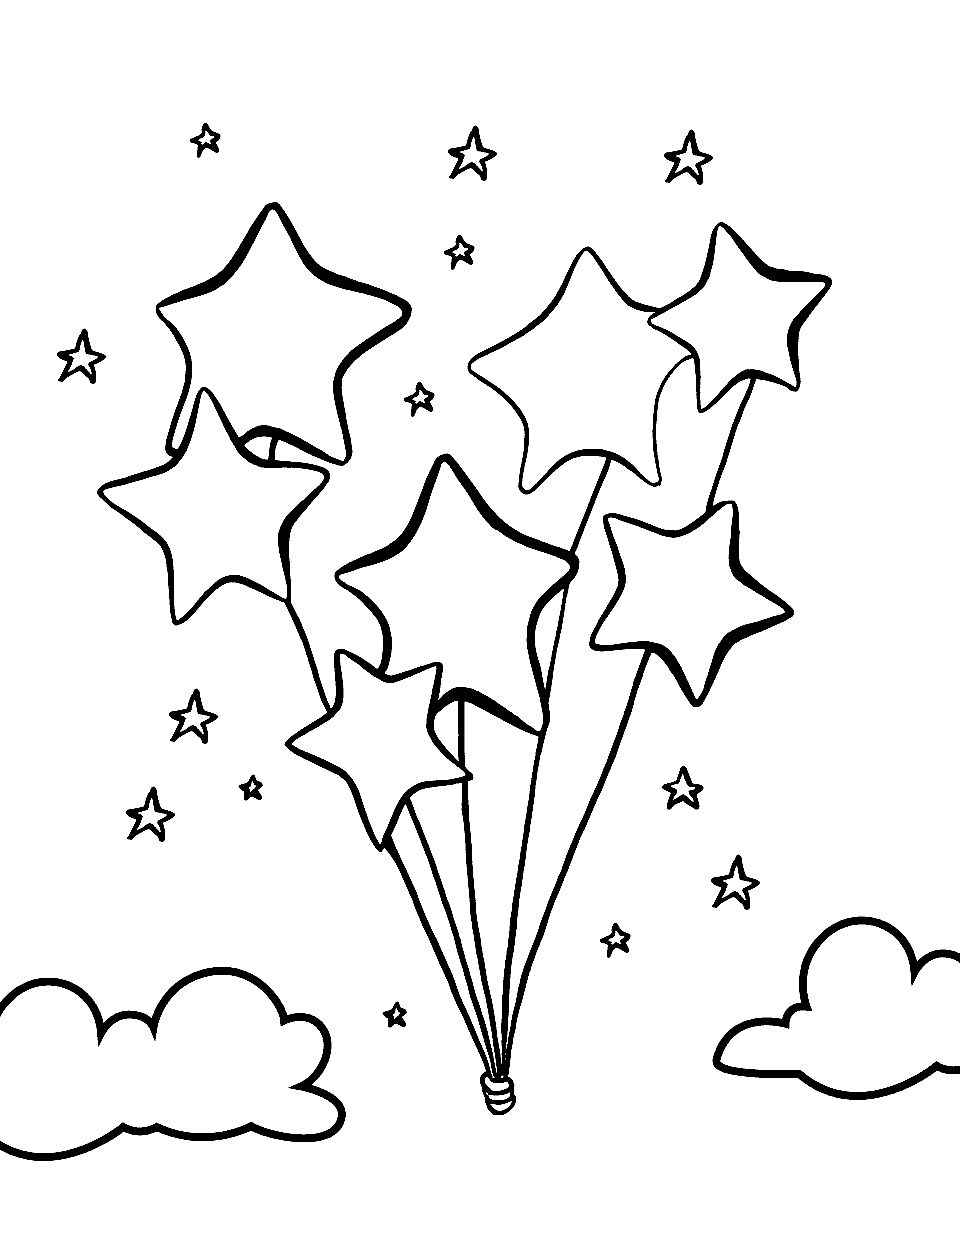 Star-Shaped Balloons Star Coloring Page - A bunch of star-shaped balloons floating in the sky.